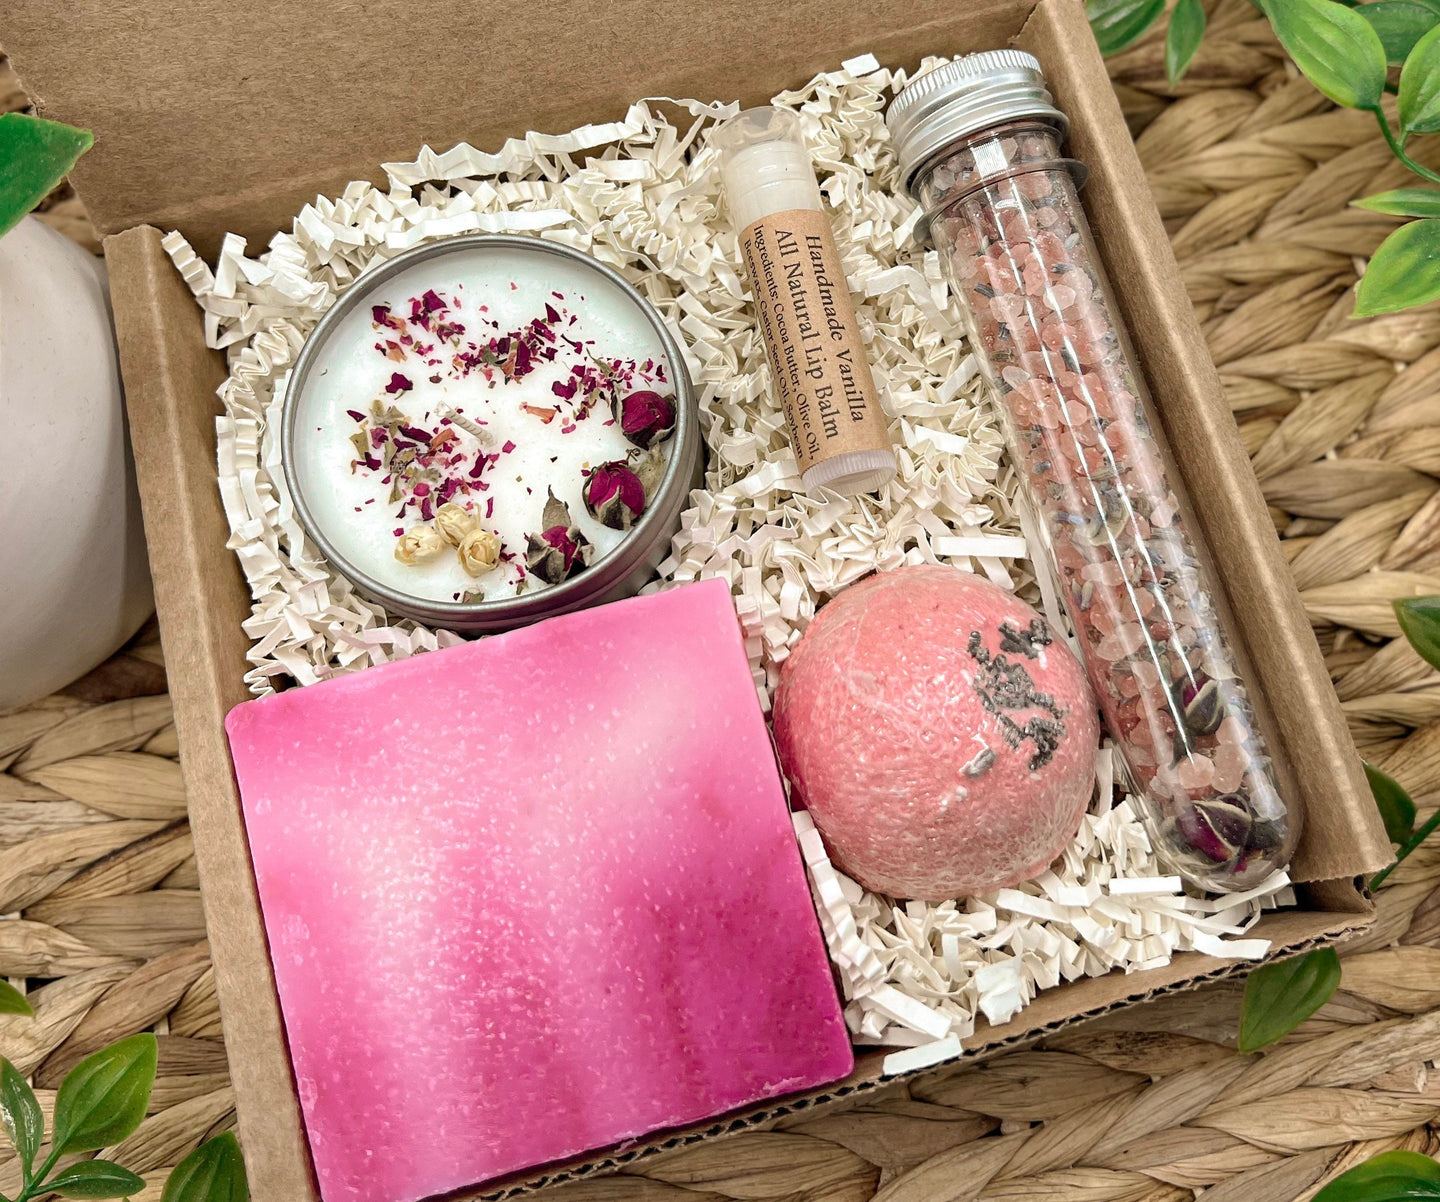 Valentines Spa Gift Box, Valentines Gift for Her, Valentines Day Self Care Set, Galentines Gift Basket, Hygge Gift Box, Spa Gift Box for Her